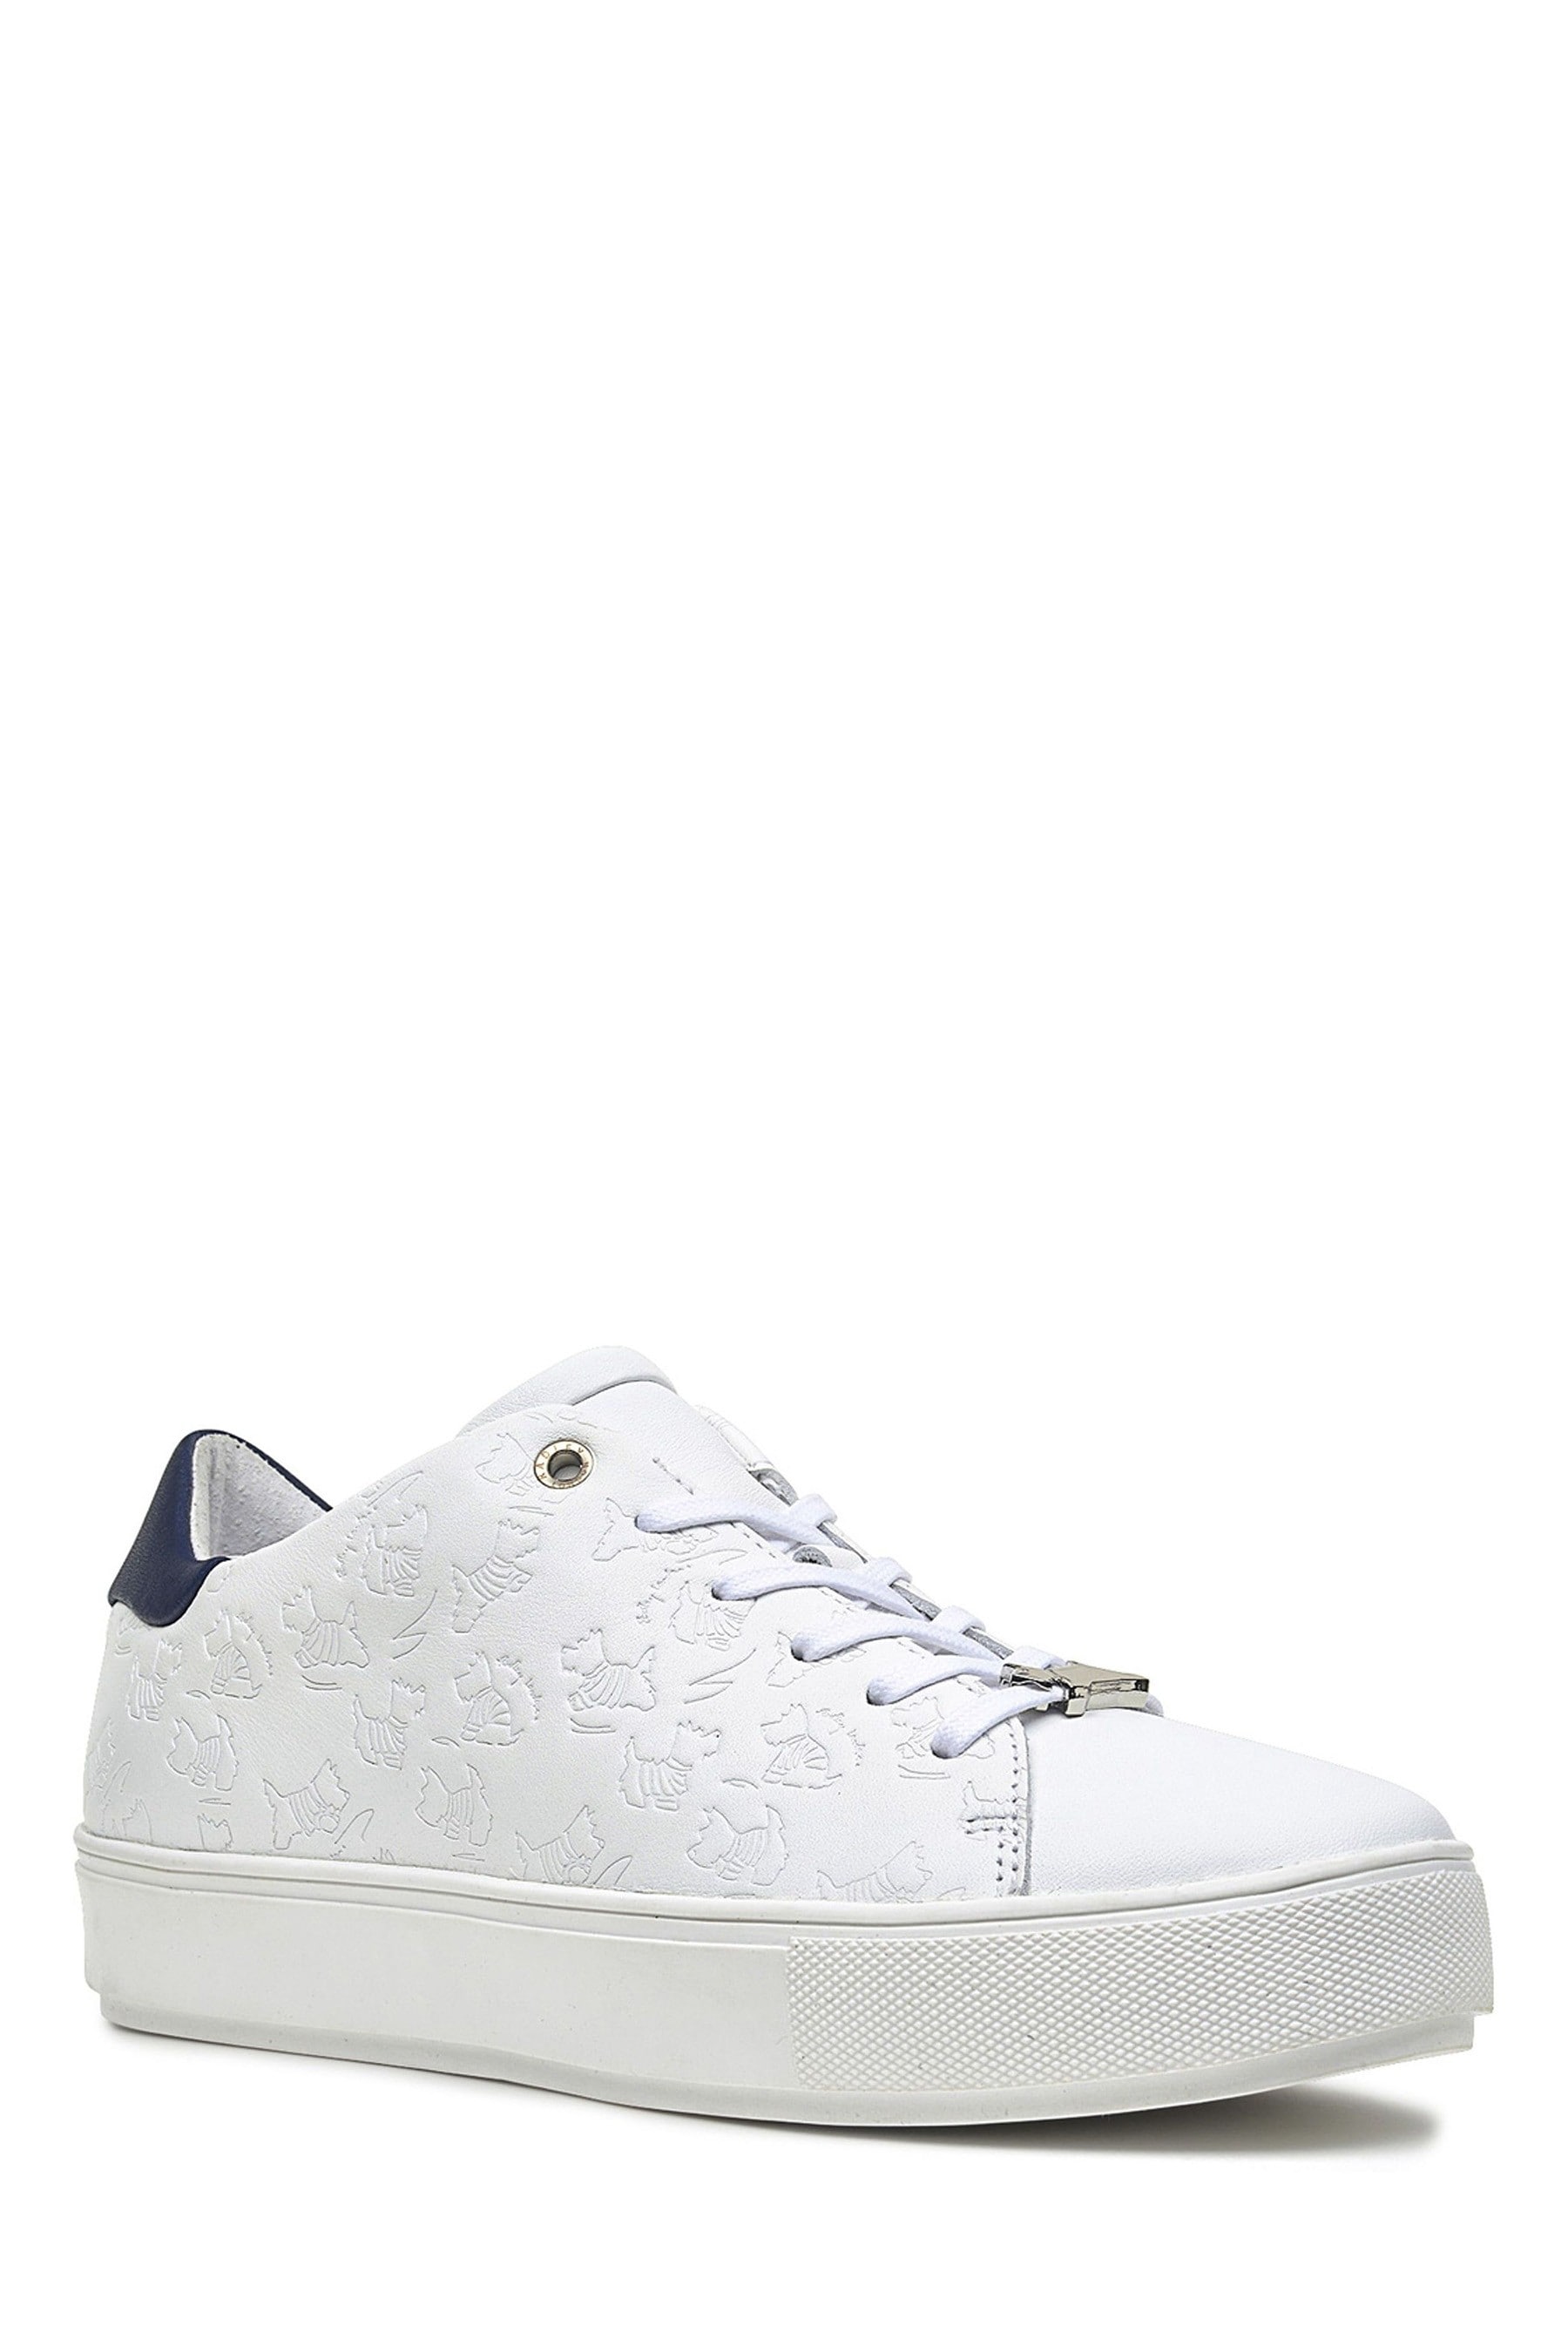 Buy Radley London White Malton Chunky Sole Emboss Trainers from the ...